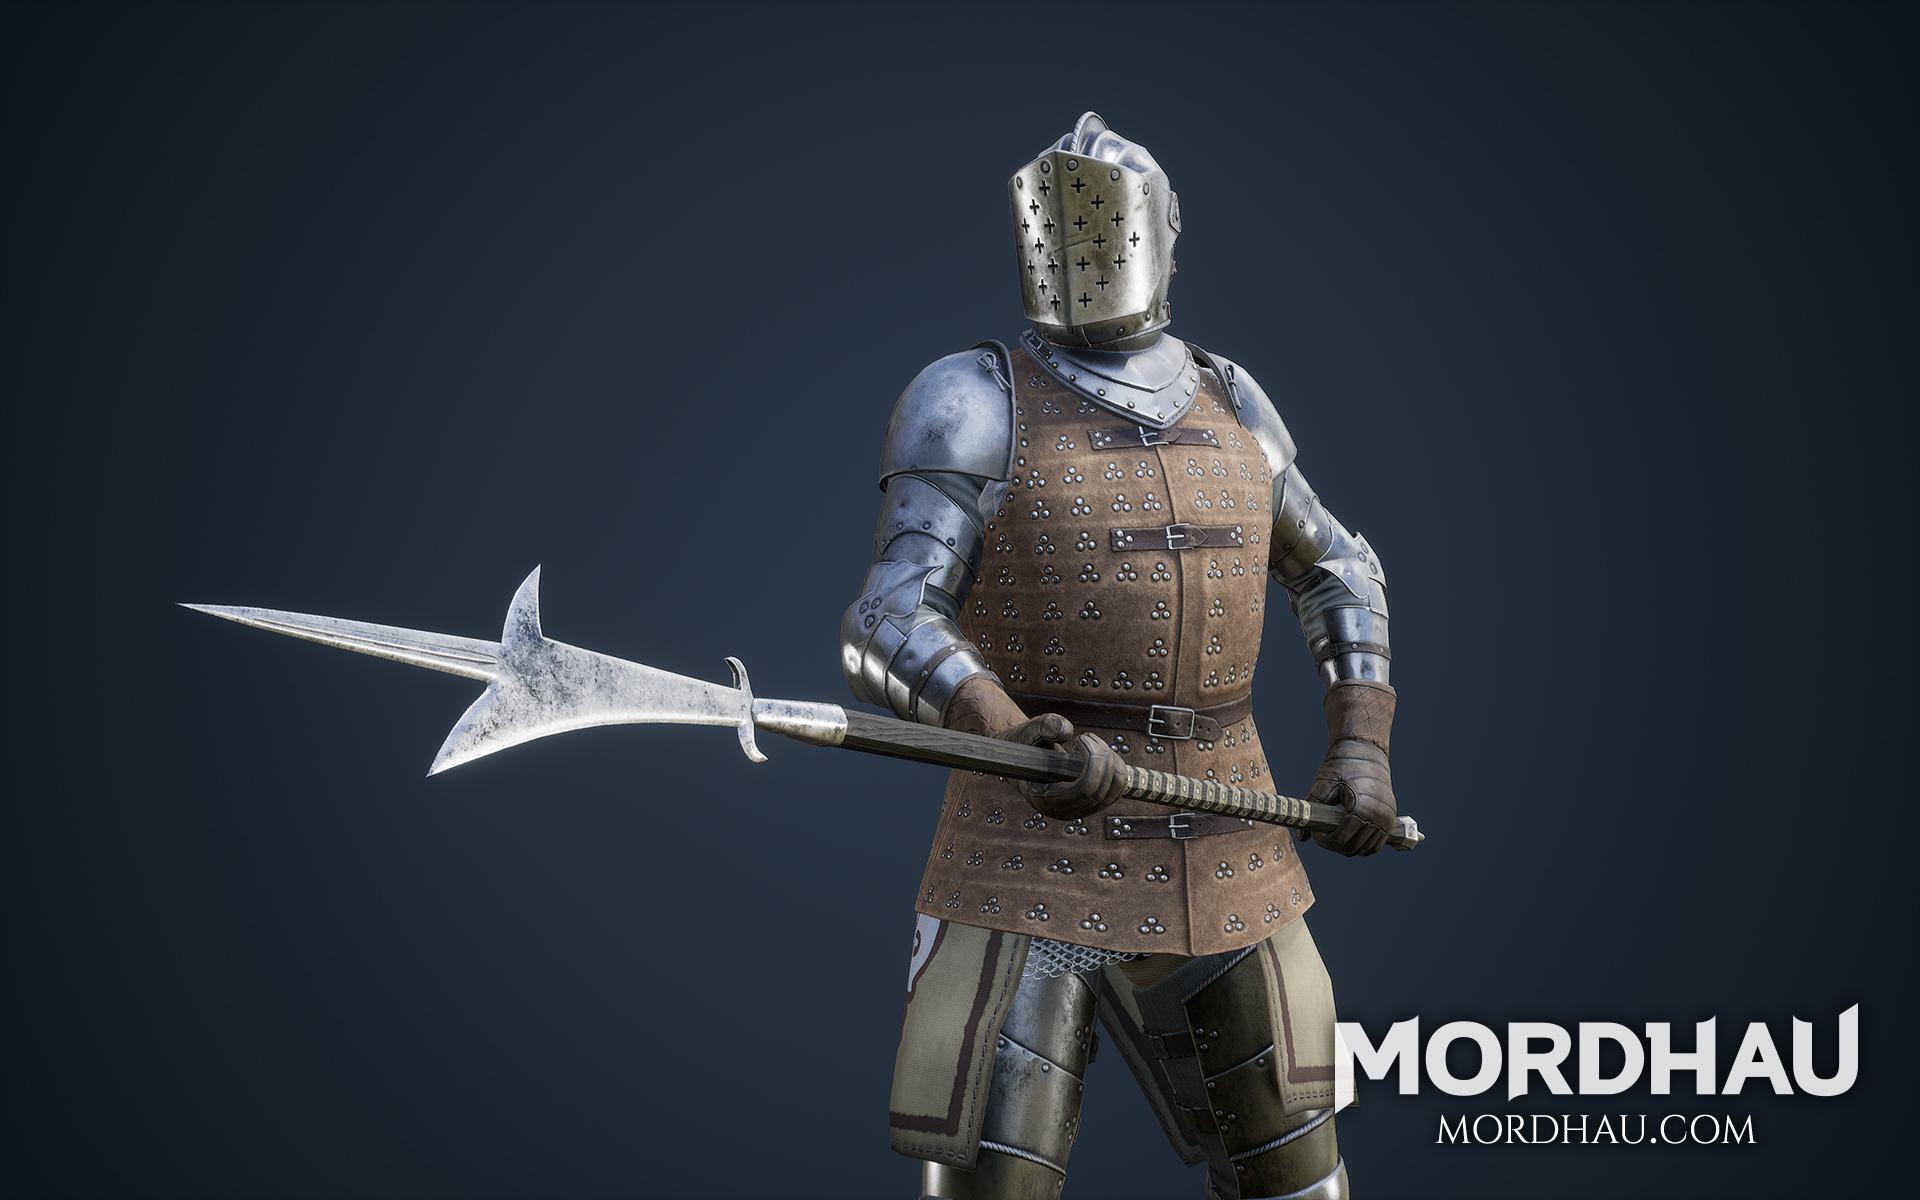 You will ba able to play your Lawdaddy in Mordhau